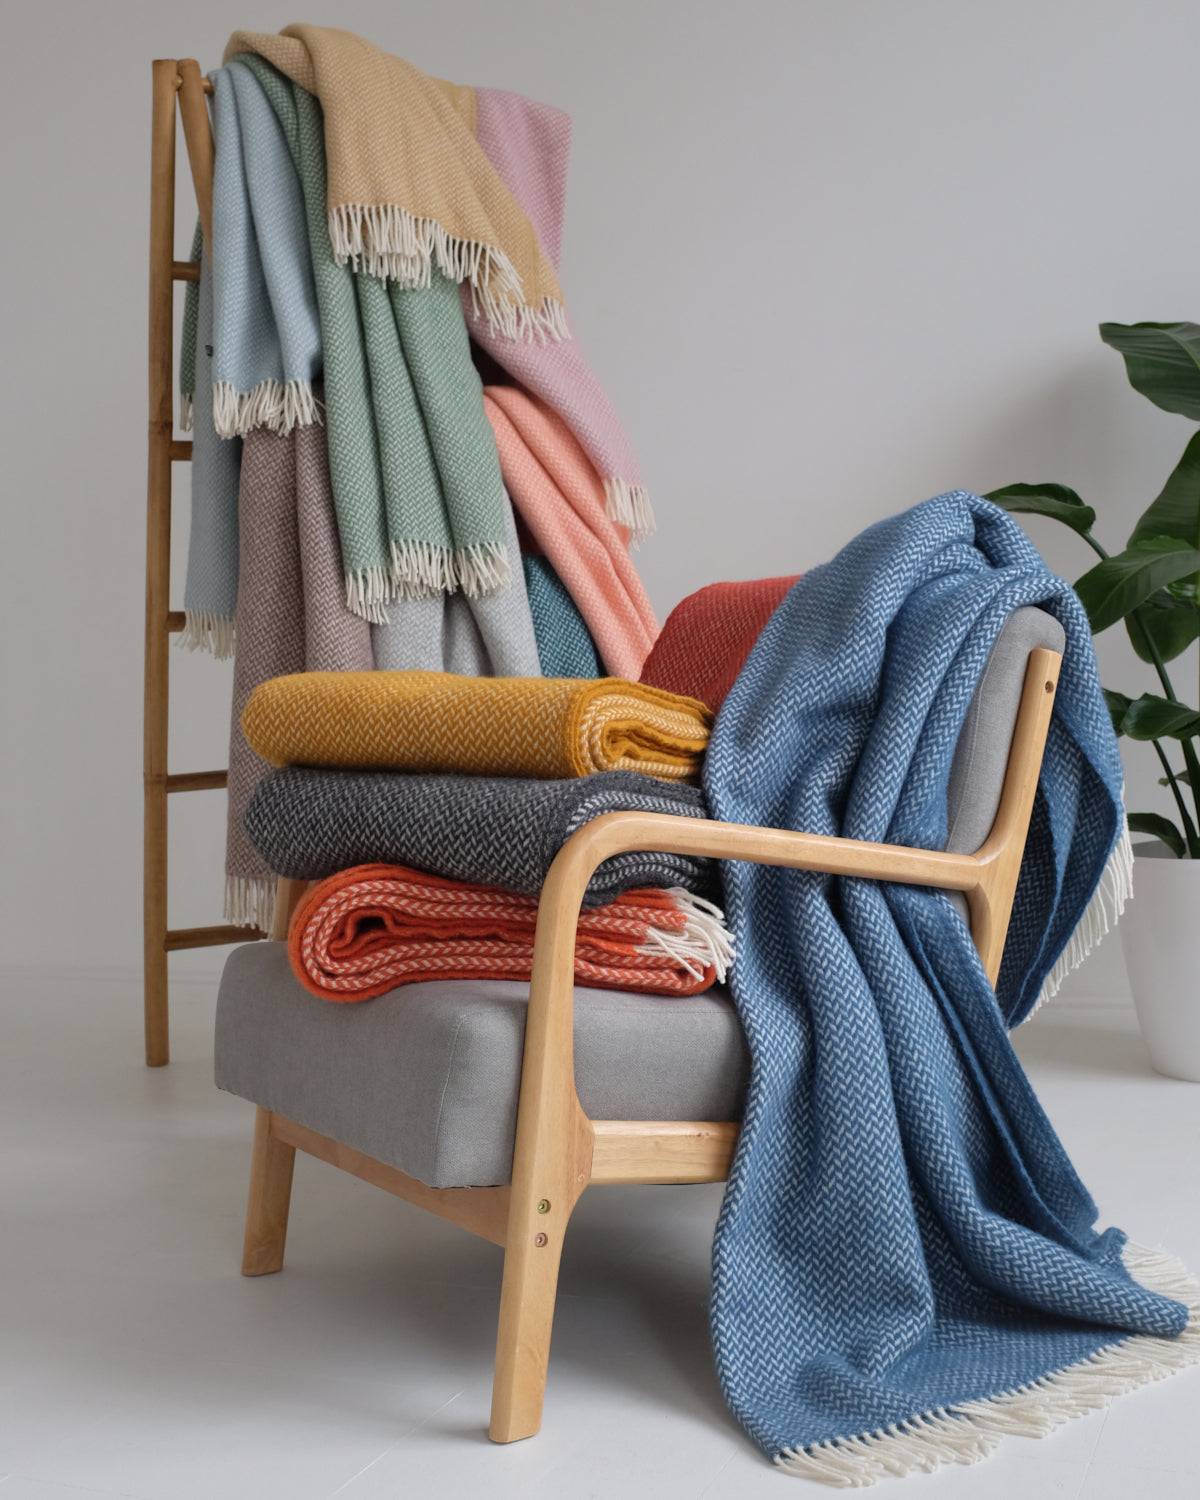 A blue wool blanket draped over a lounge chair next to a stack of folded blankets. Wool throws are hanging from a wooden ladder behind the chair